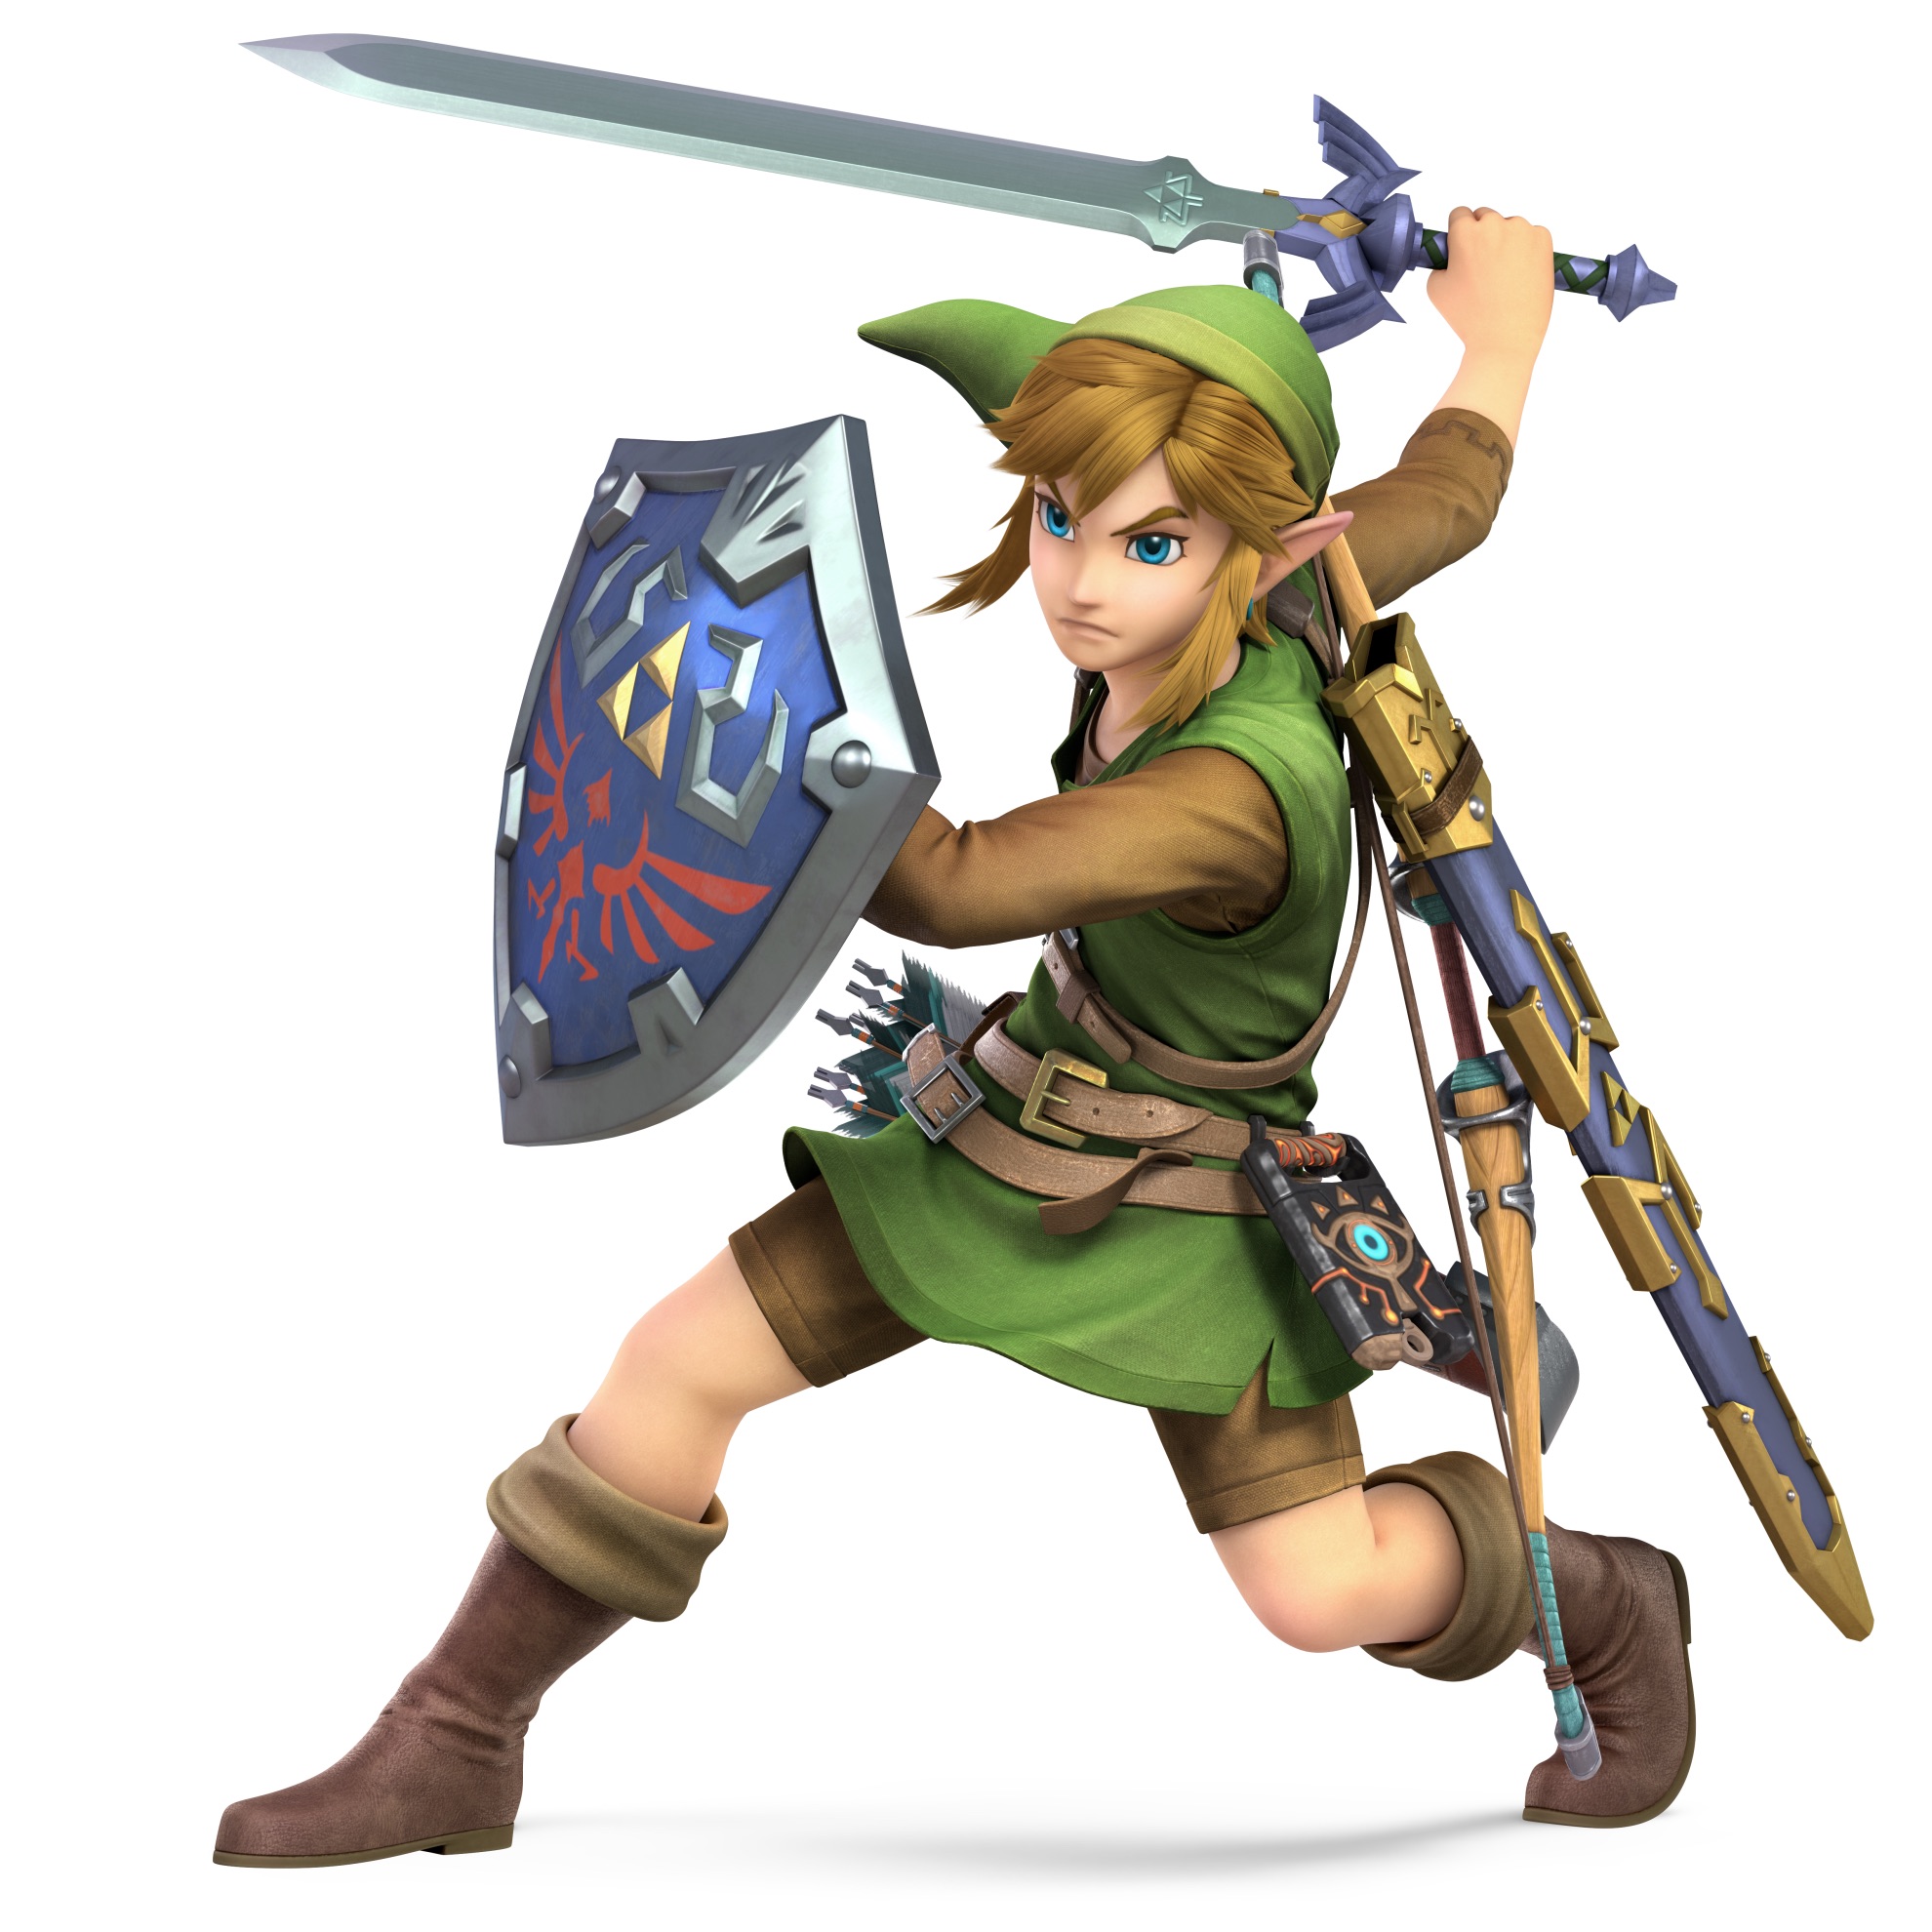 Link Armor of the Wild Super Smash Bros. Ultimate Character Render